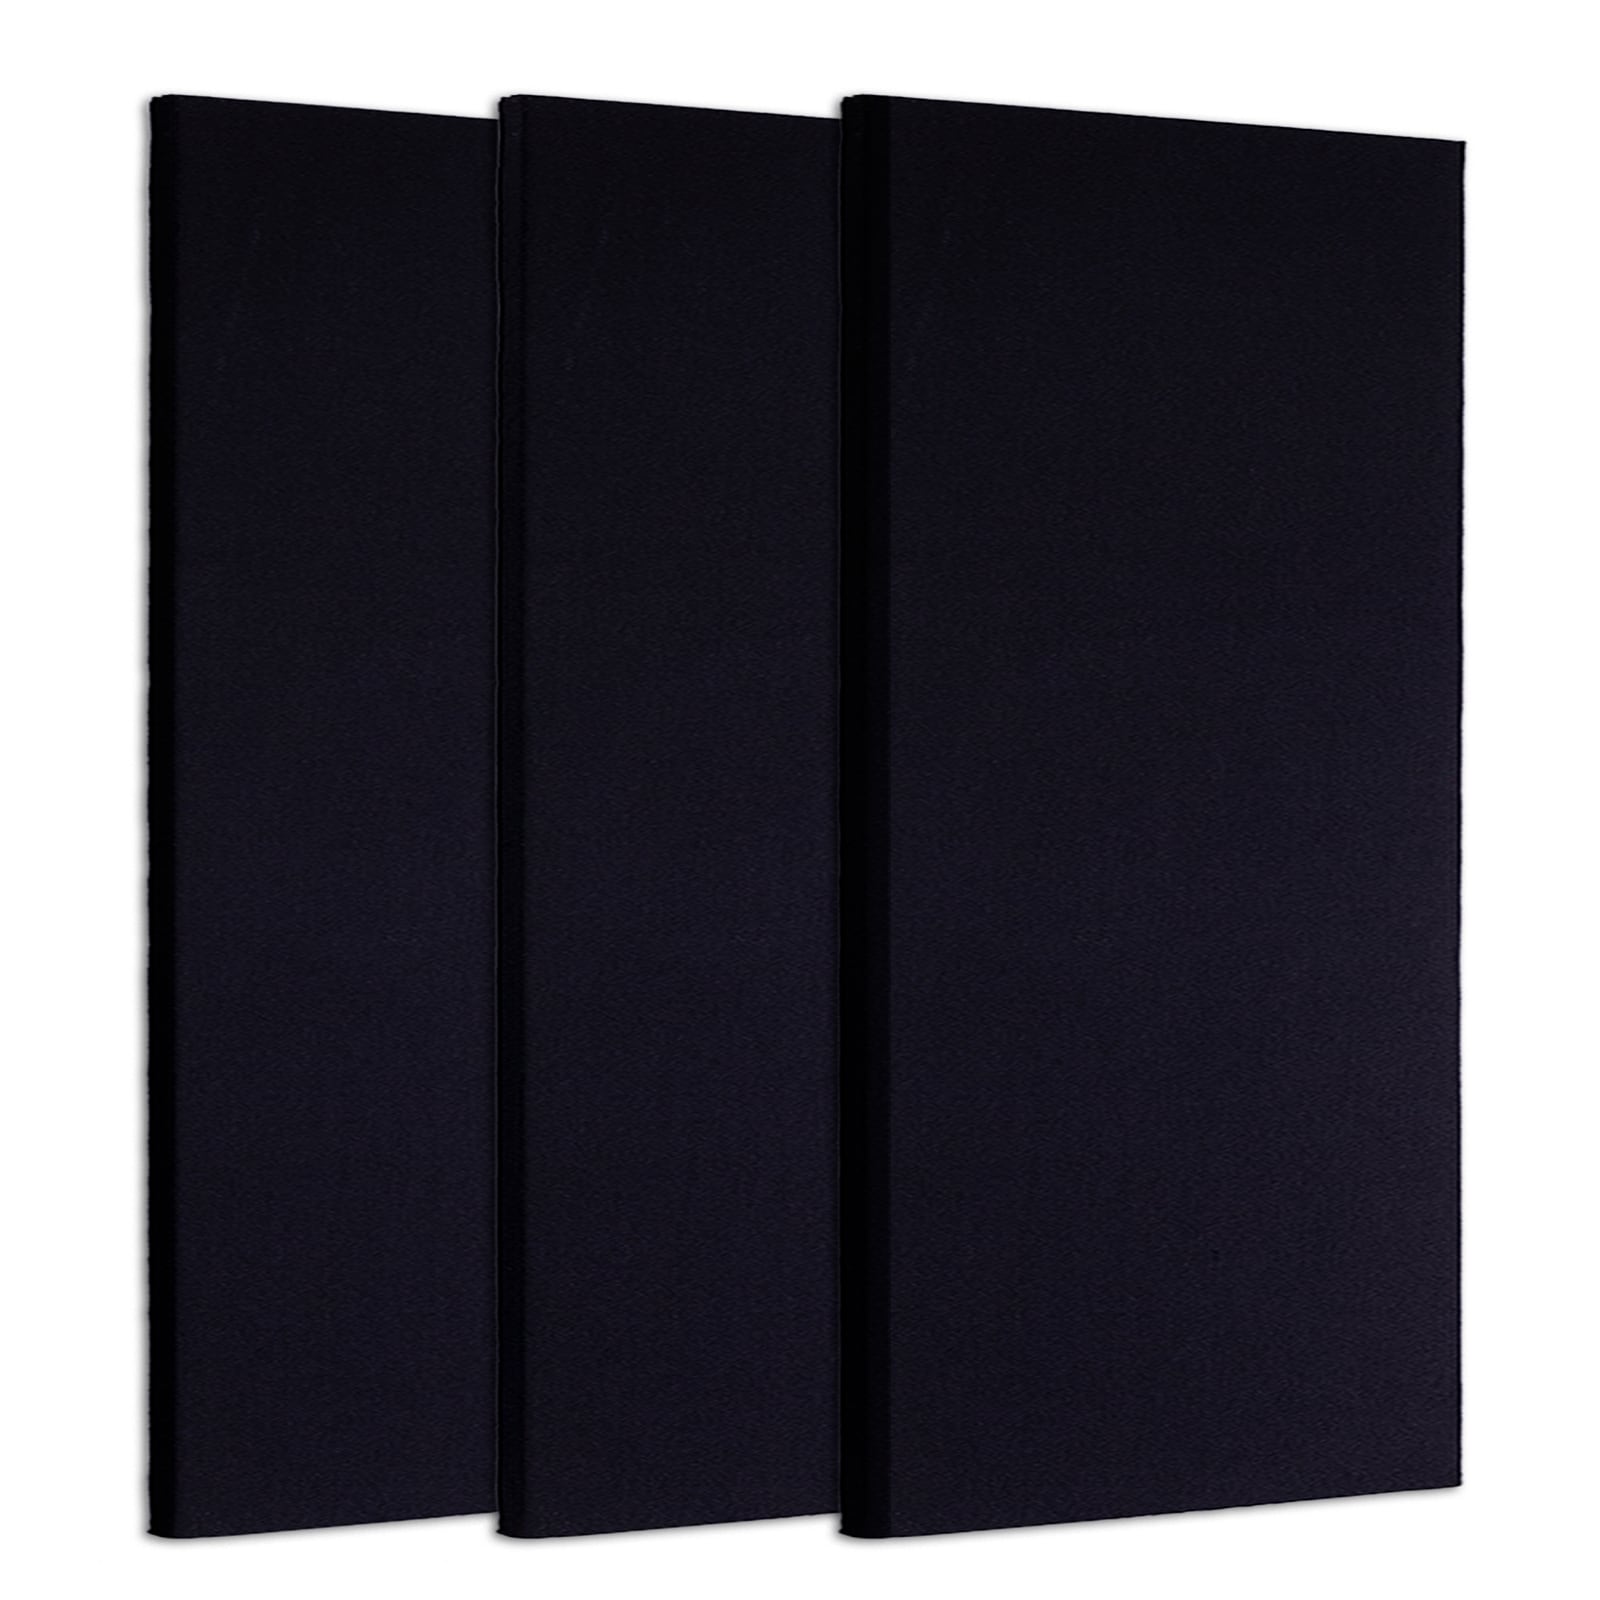 Fabric Panels  Sound Absorbing Acoustic Panels